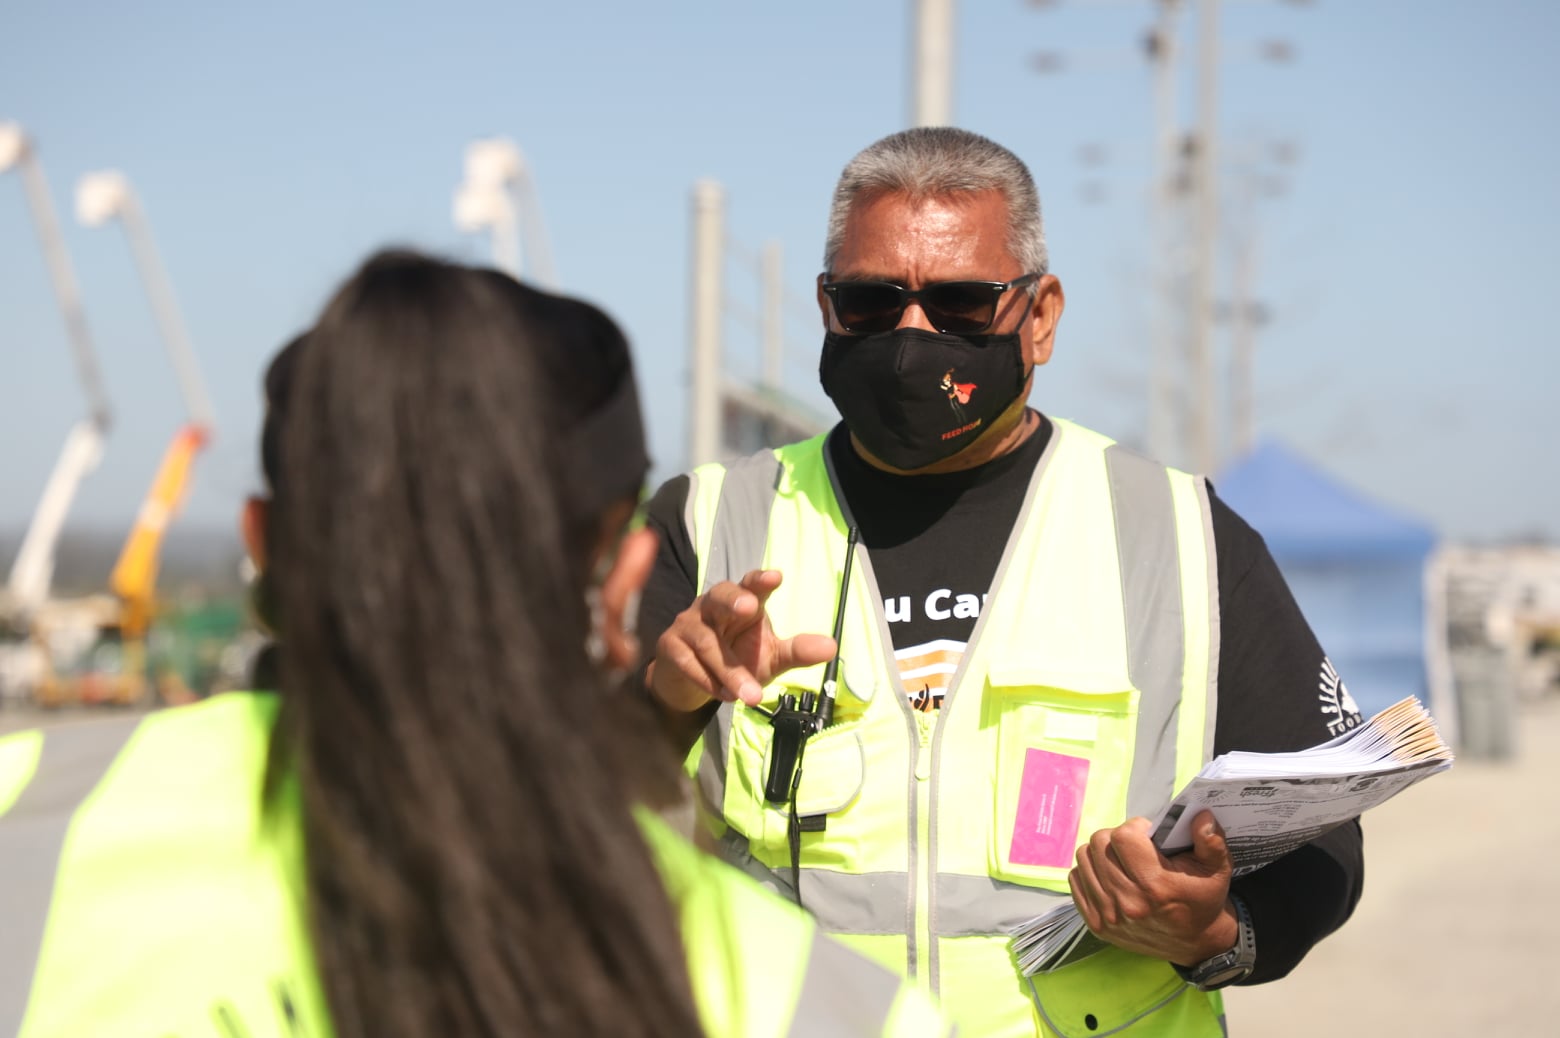 Joel Campos in mask at mass distribution center